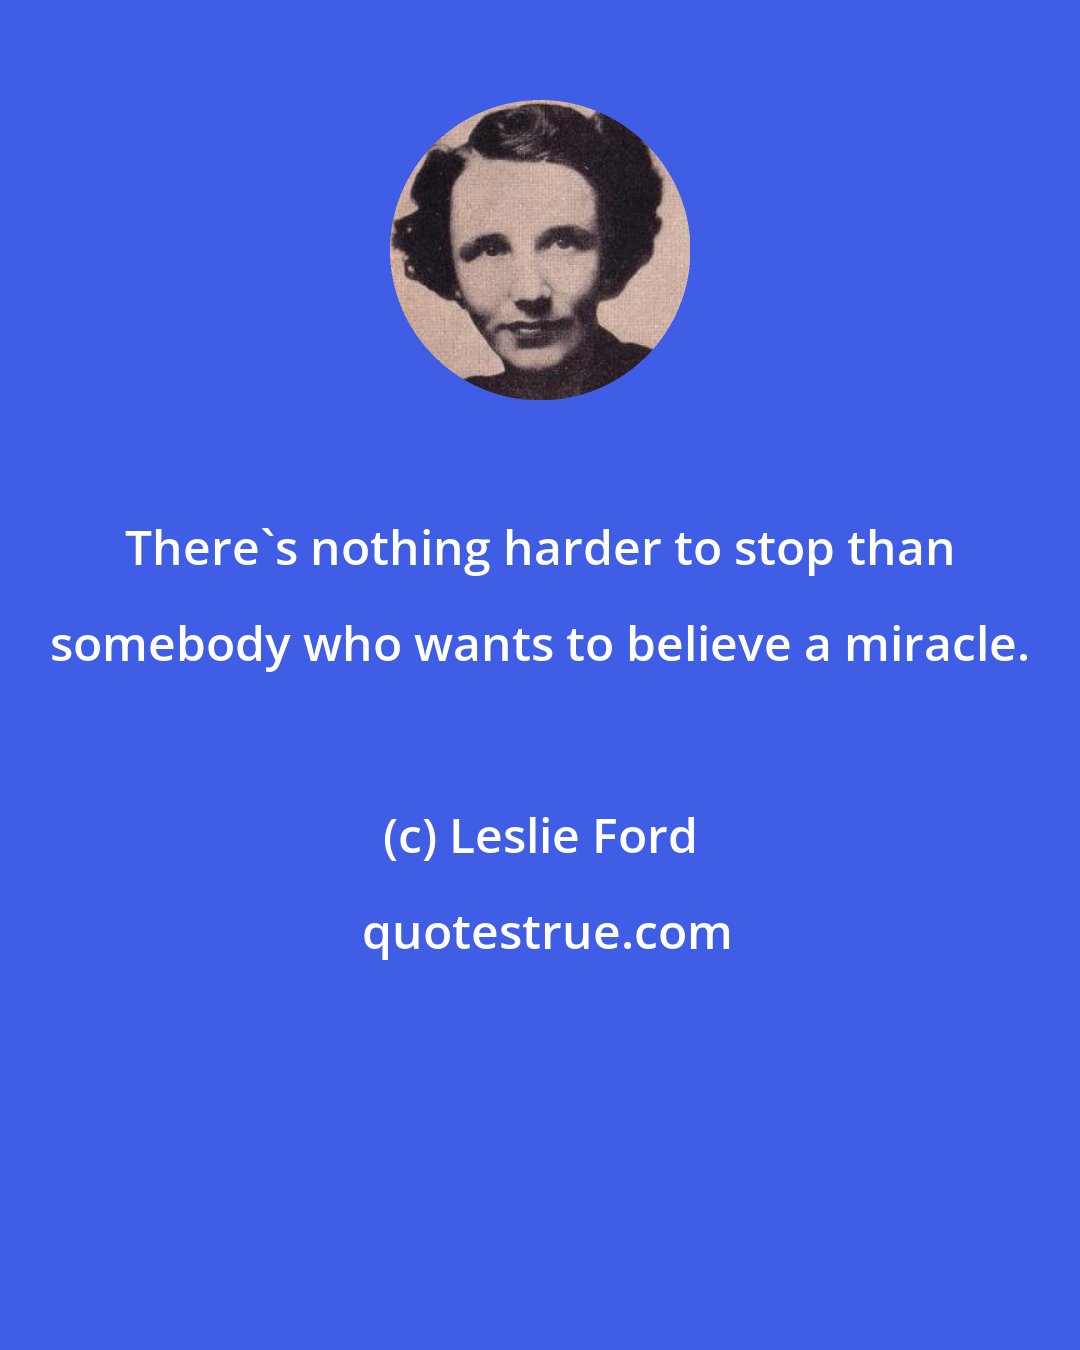 Leslie Ford: There's nothing harder to stop than somebody who wants to believe a miracle.